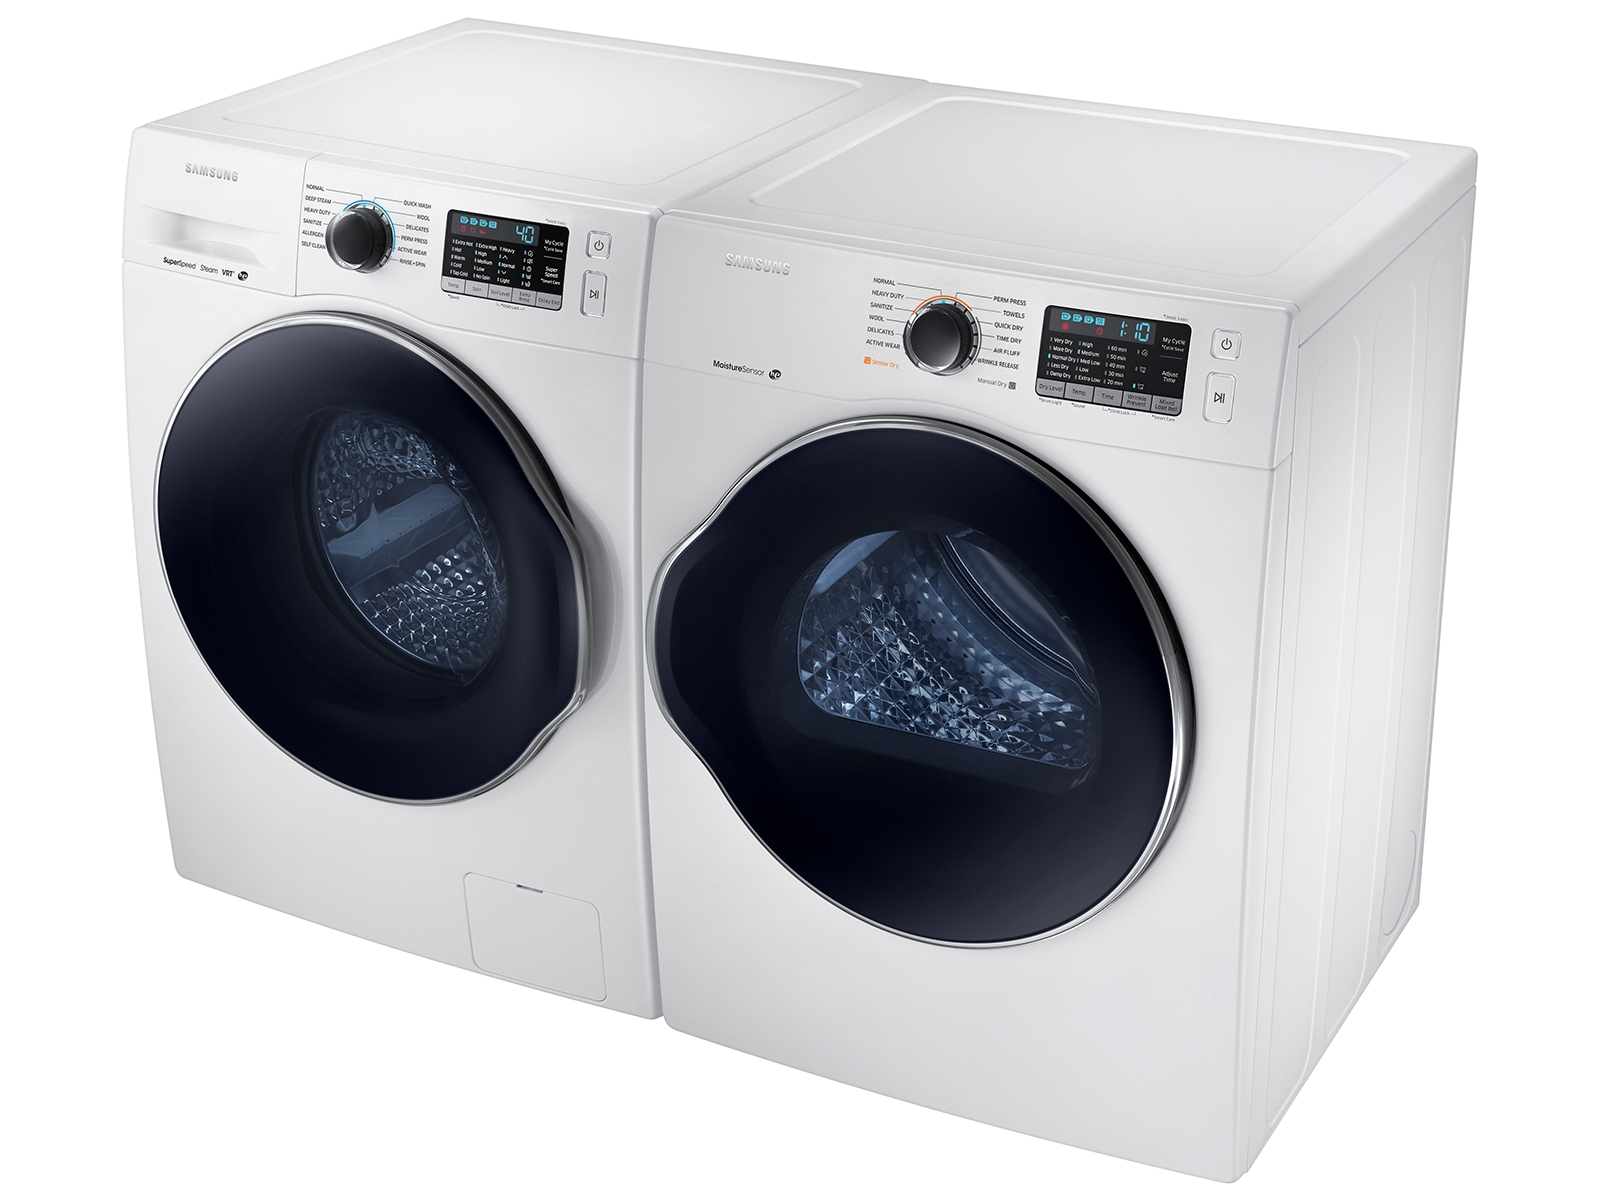 Samsung's smart washer/dryer lets you pick when you want the cycle to end -  CNET